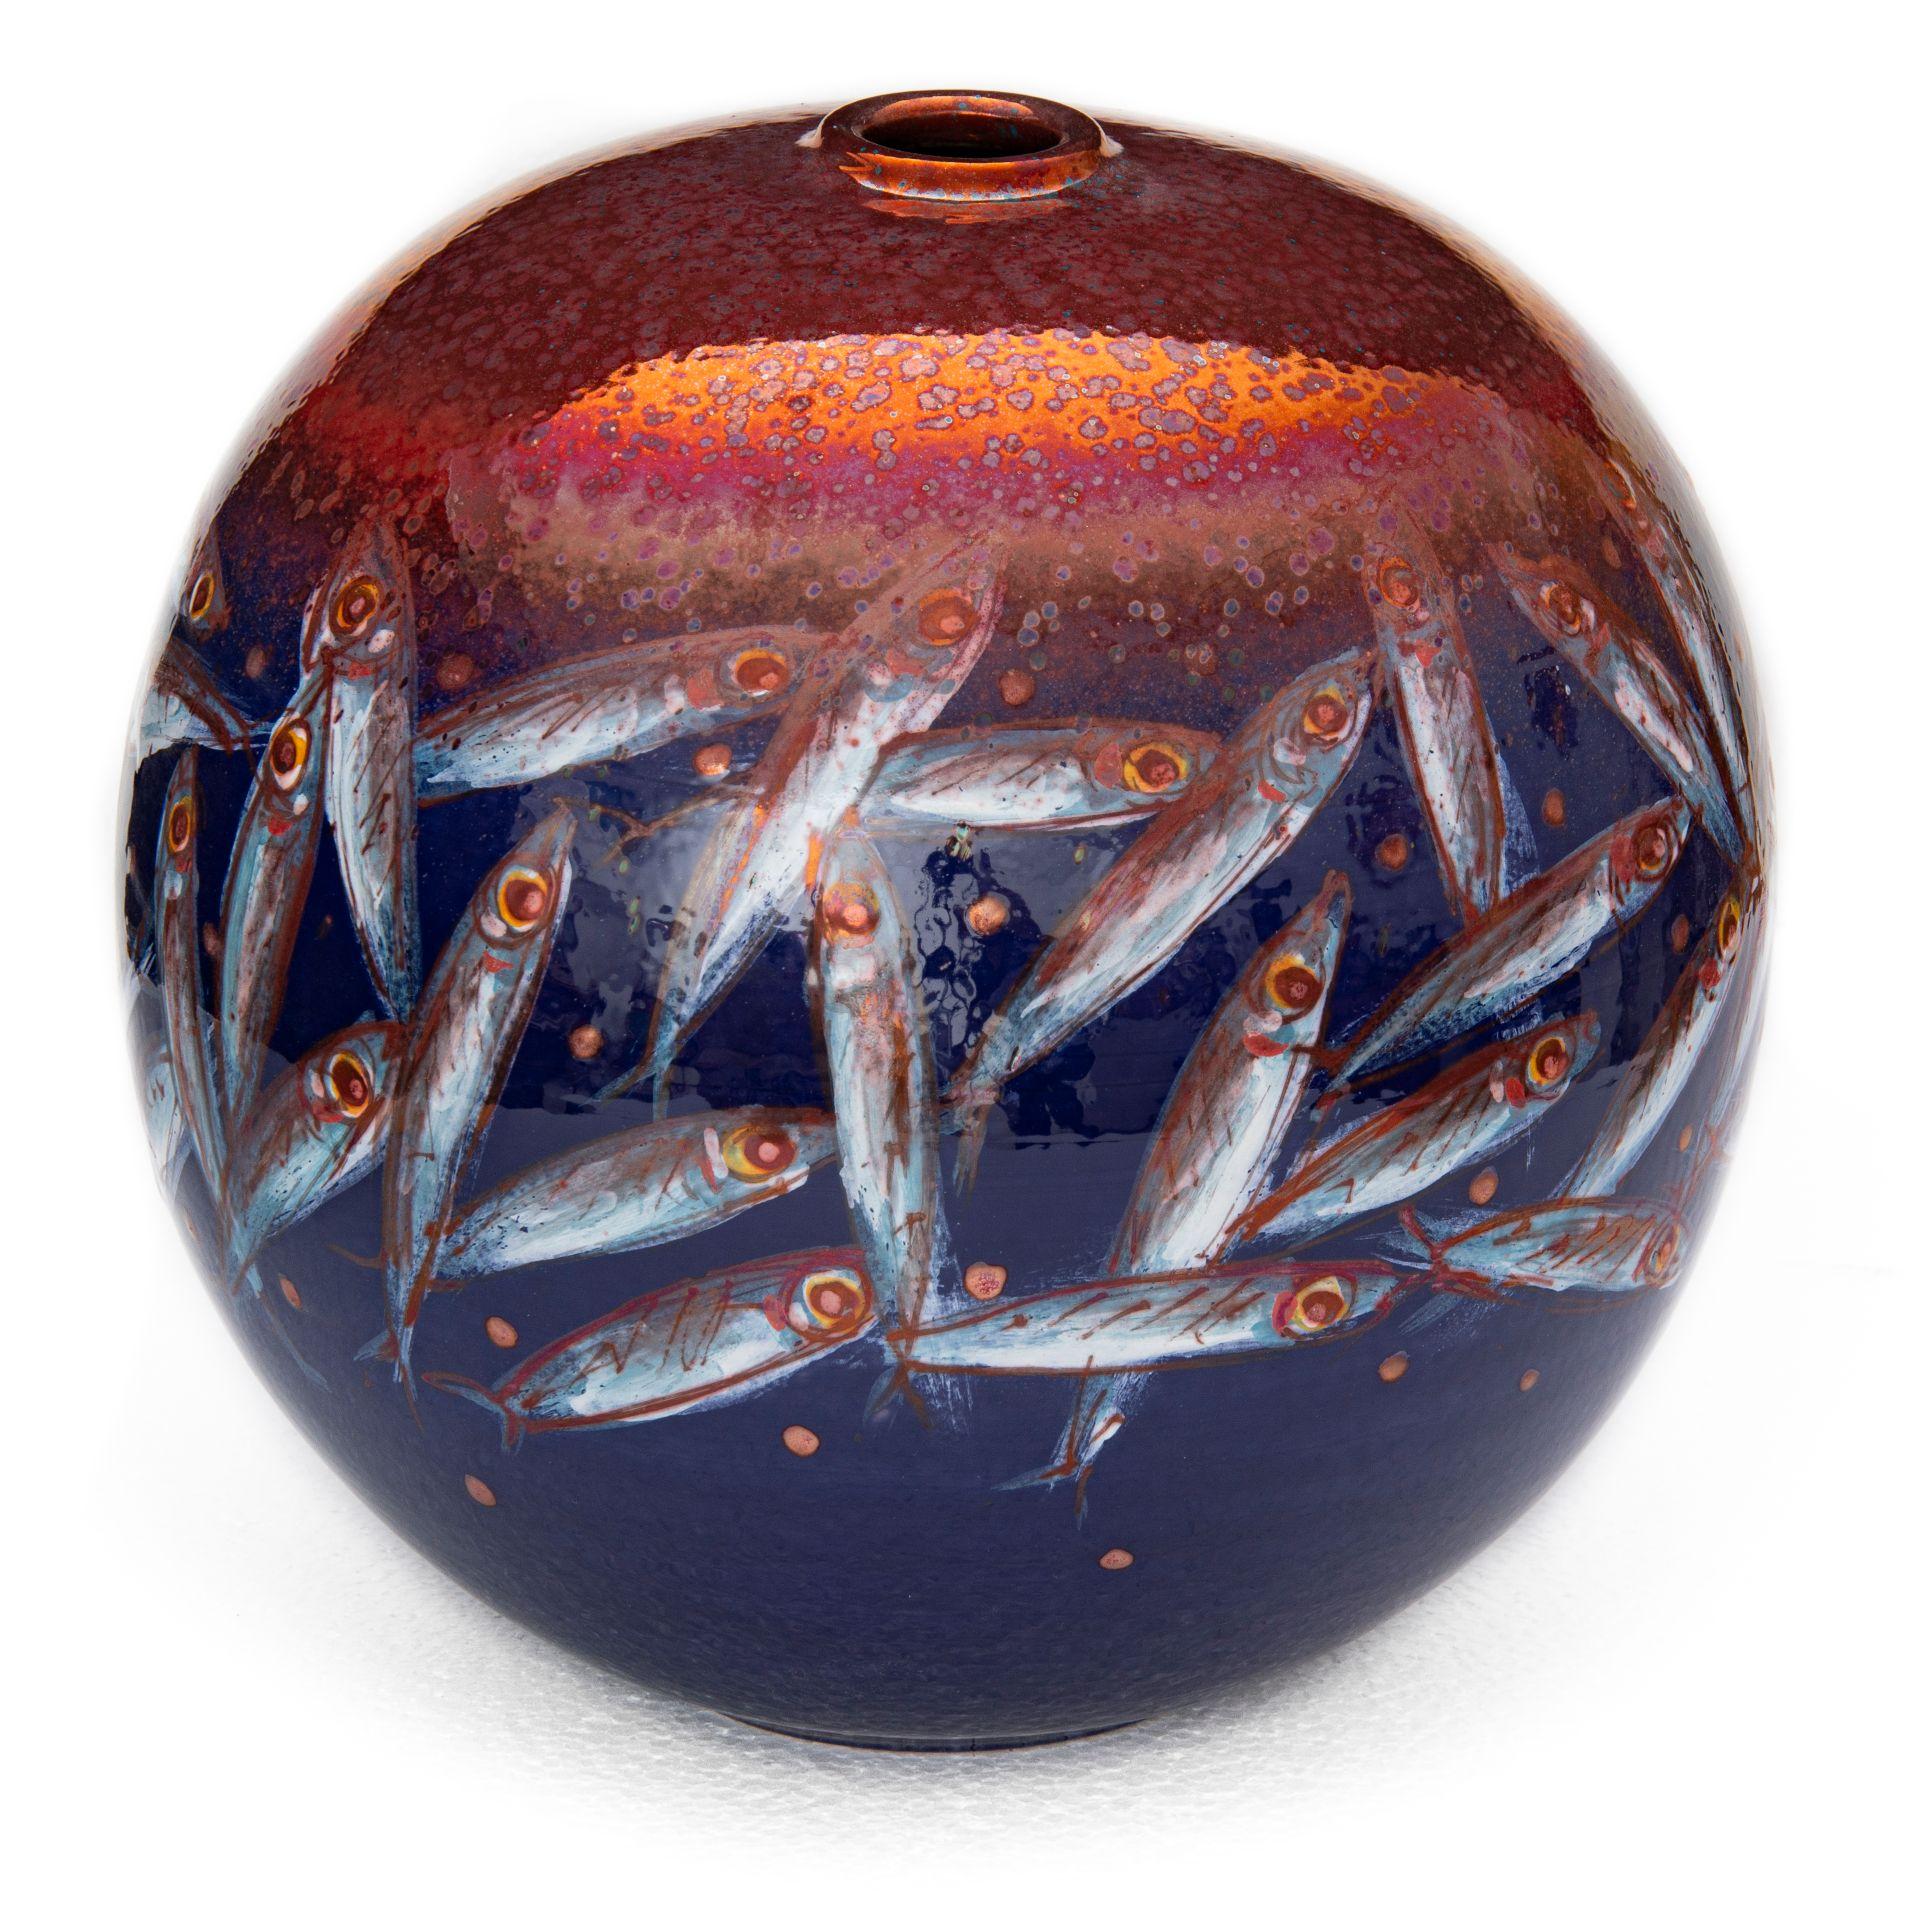 Mediterranea Moon jar, full-fire reduction faience earthenware 30cm diameter, unique piece, 2020.

Bottega Vignoli is a brand of artistic ceramics based in Faenza, one of the most representative ceramic production centres in Italy. Founded in 1976